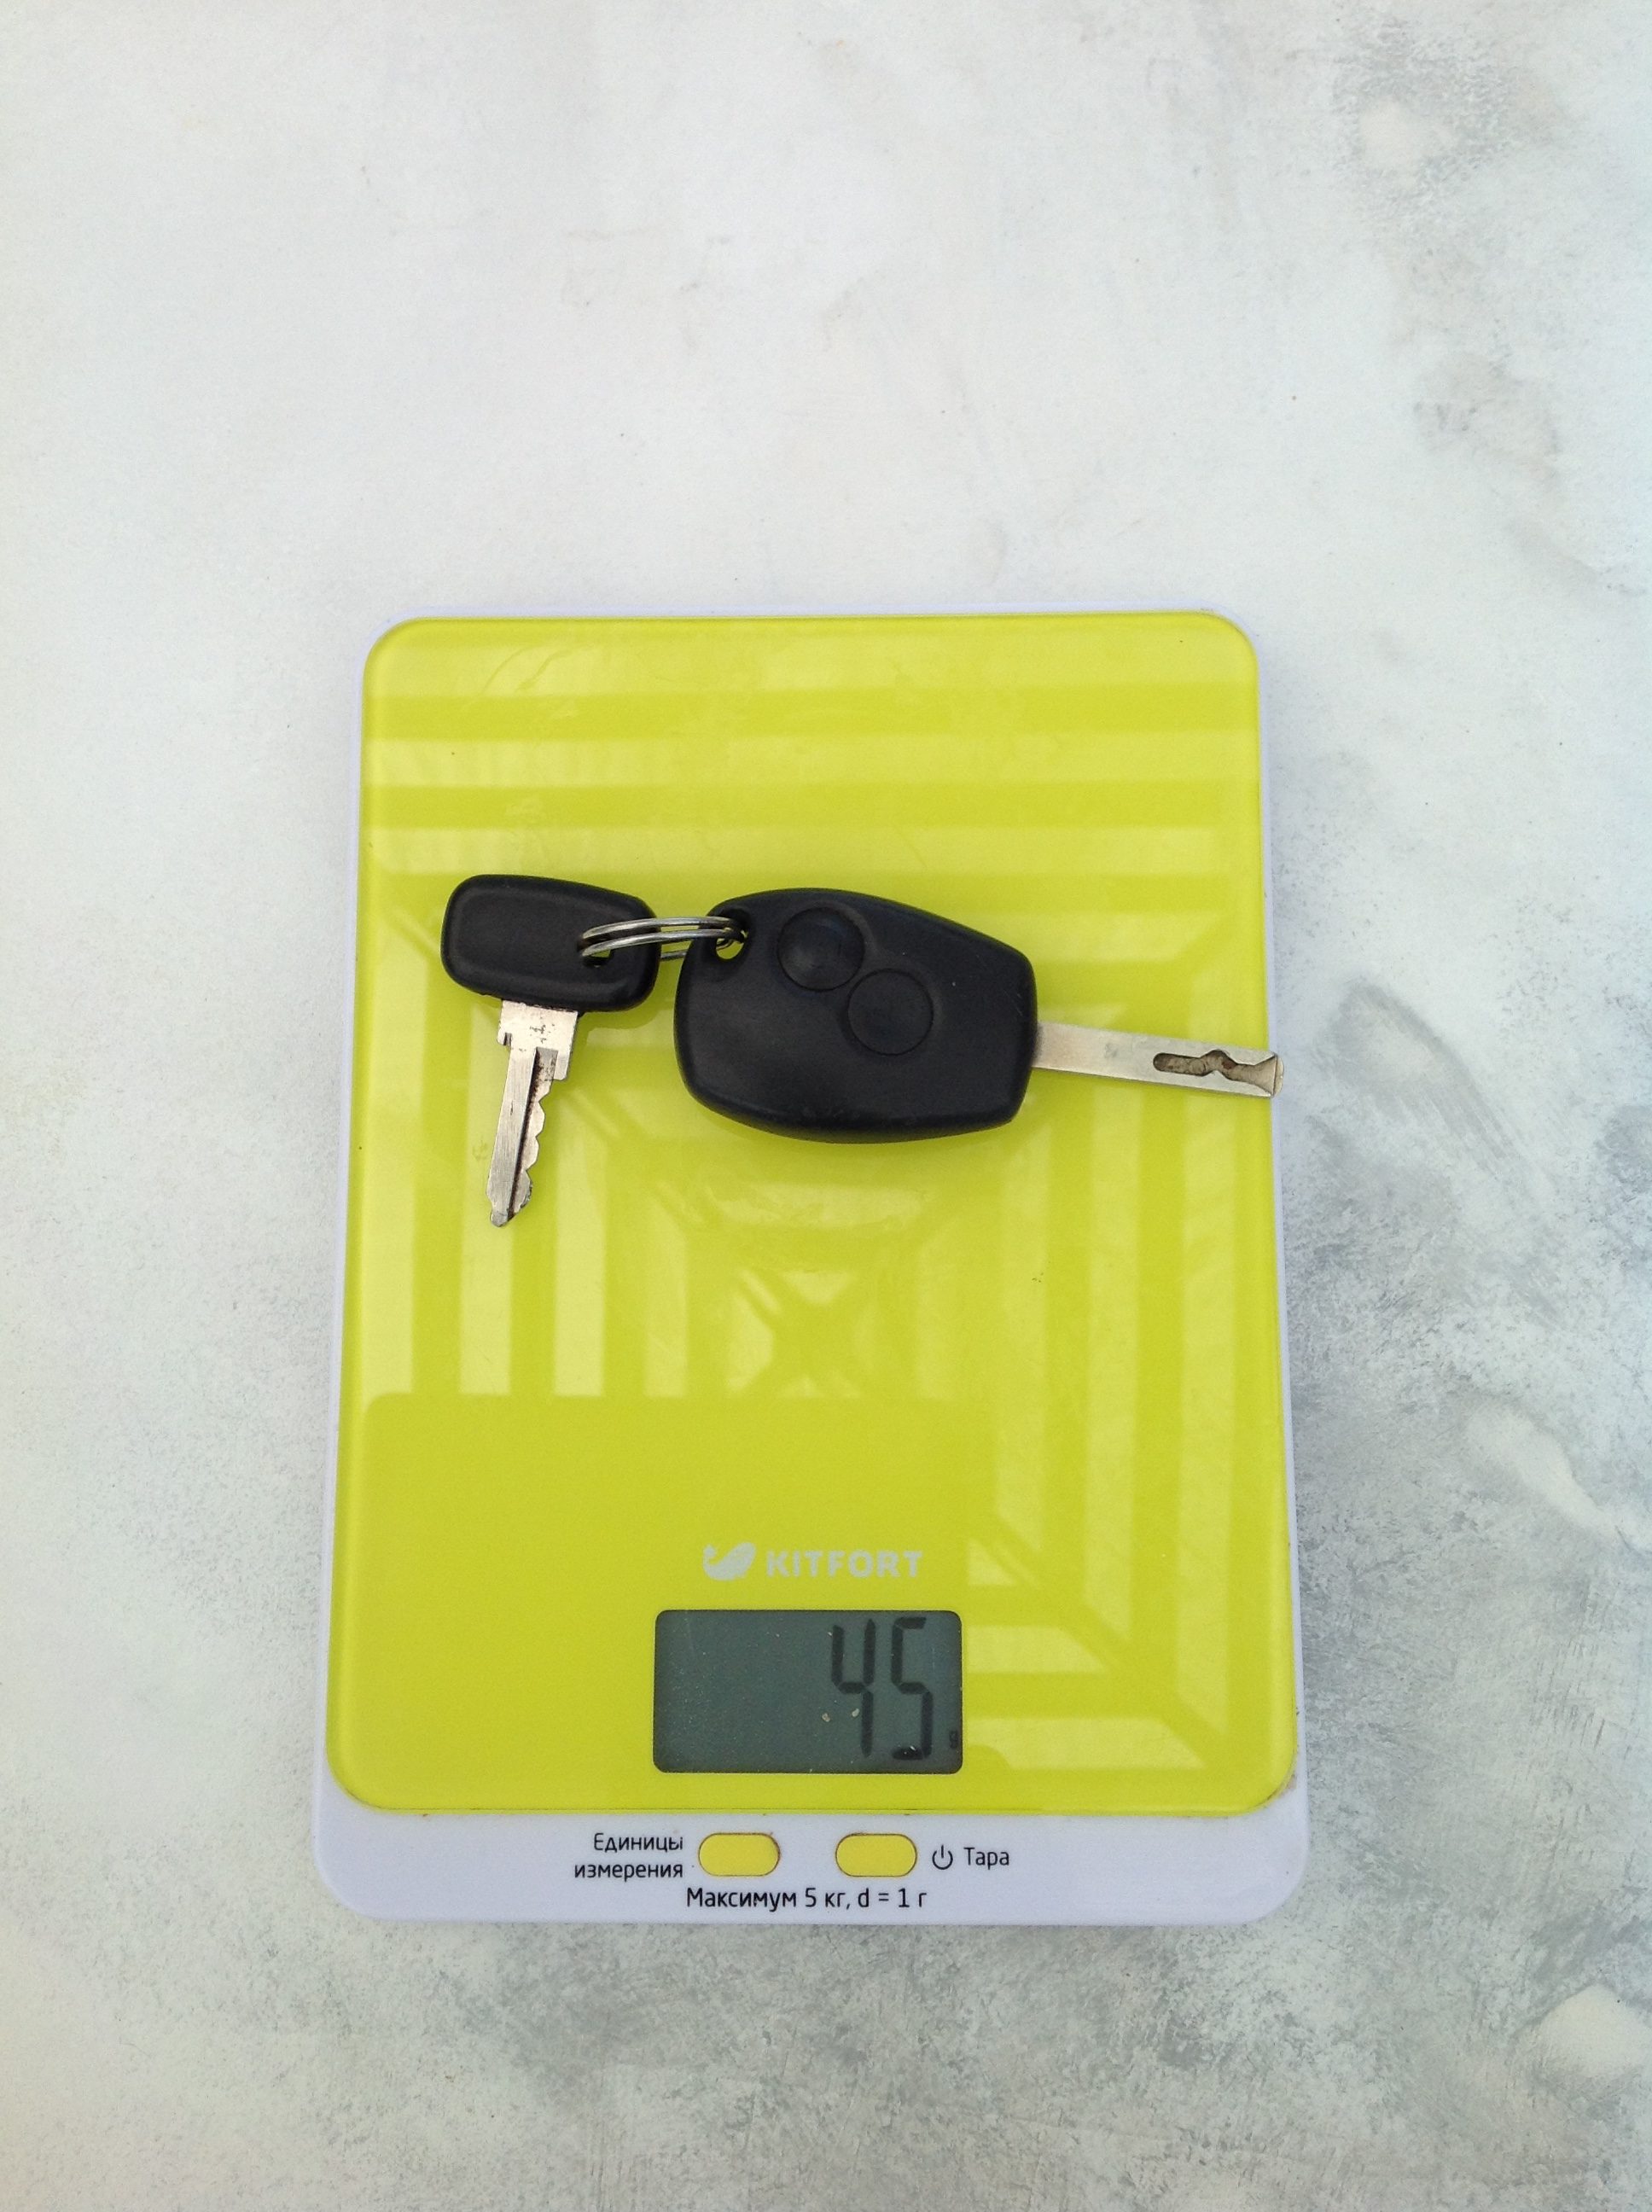 How much do Renault Clio III keys weigh?